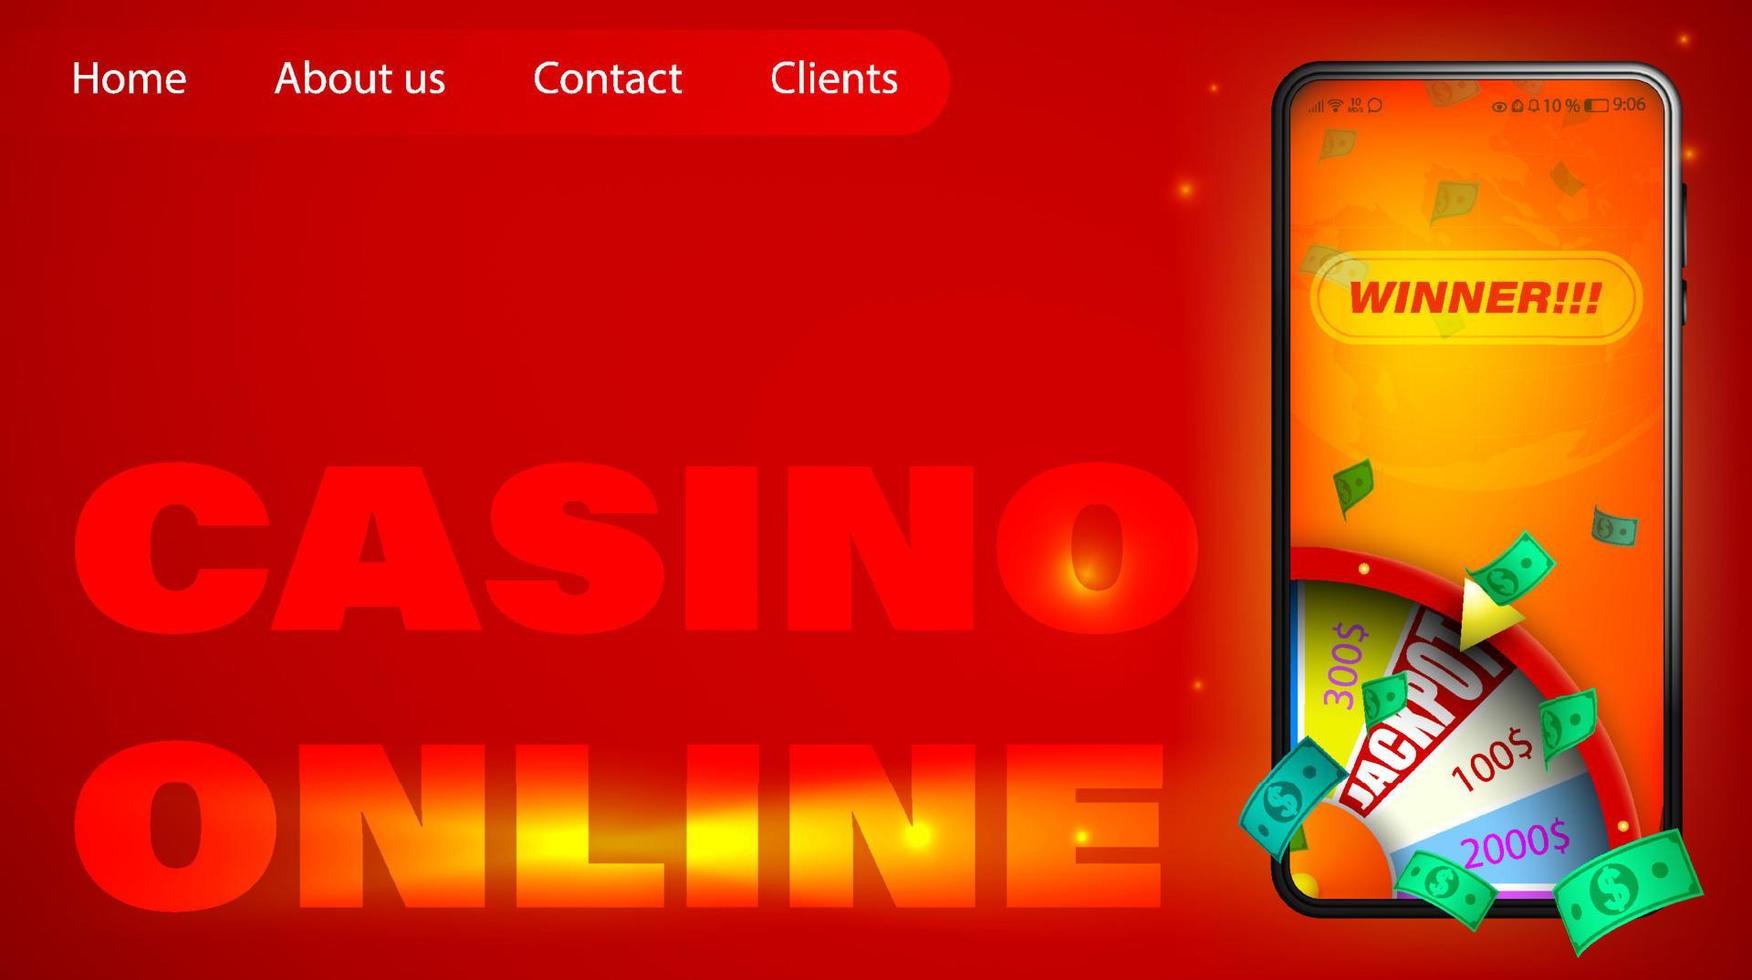 Online casino in realistic smartphone. Roulette game, wheel of fortune. Sports betting. Online game winner, jackpot. Horizontal web banner design concepts. Vector illustration